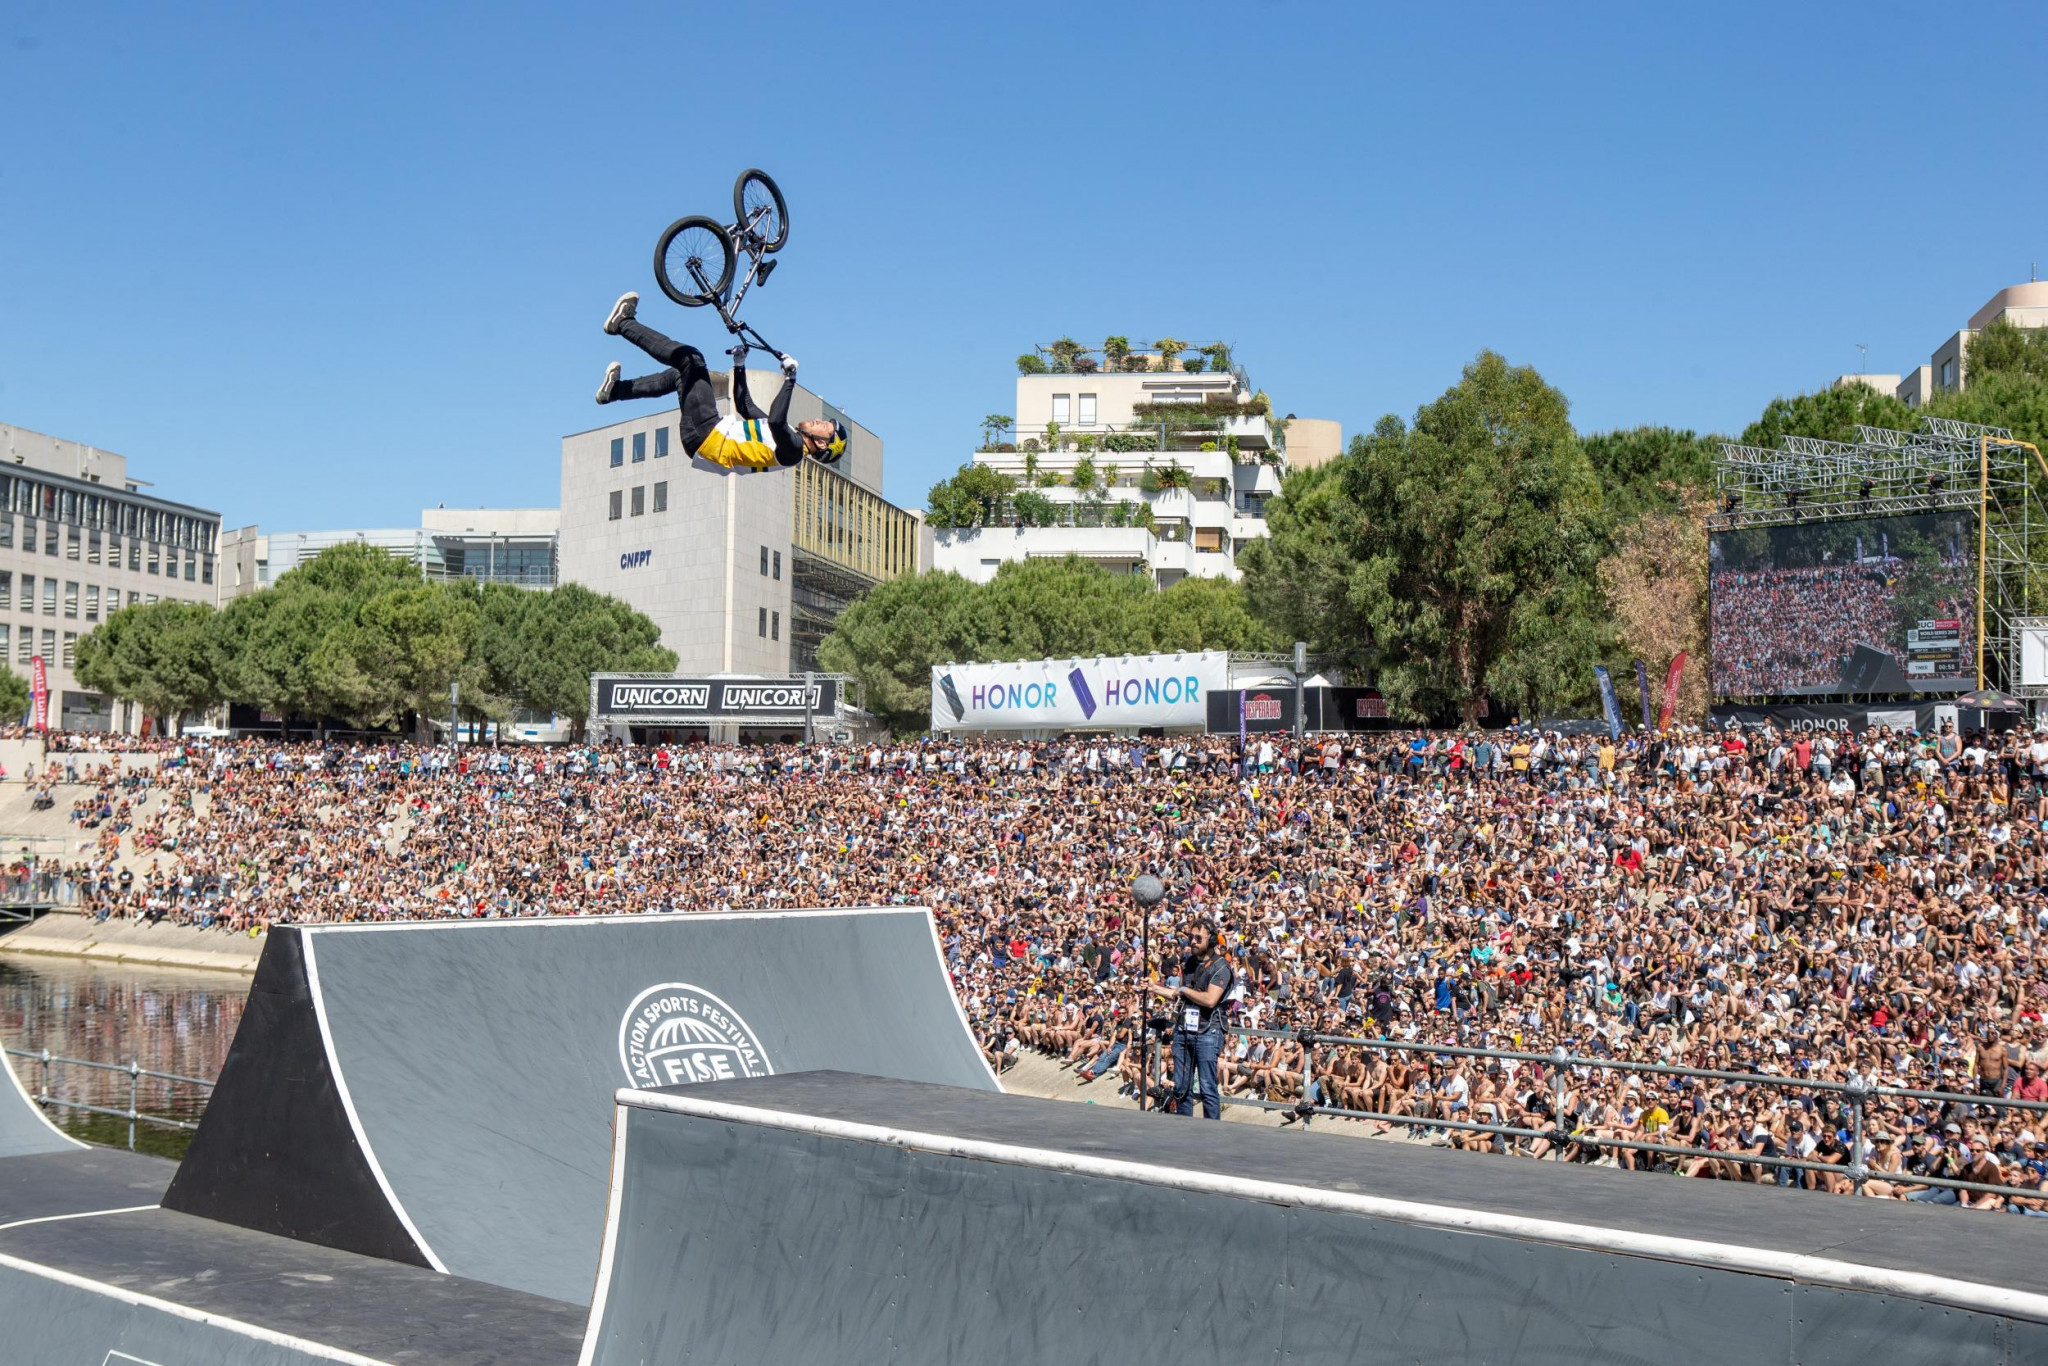 Olympic champion Martin praises FISE for making his career possible as event seeks new growth